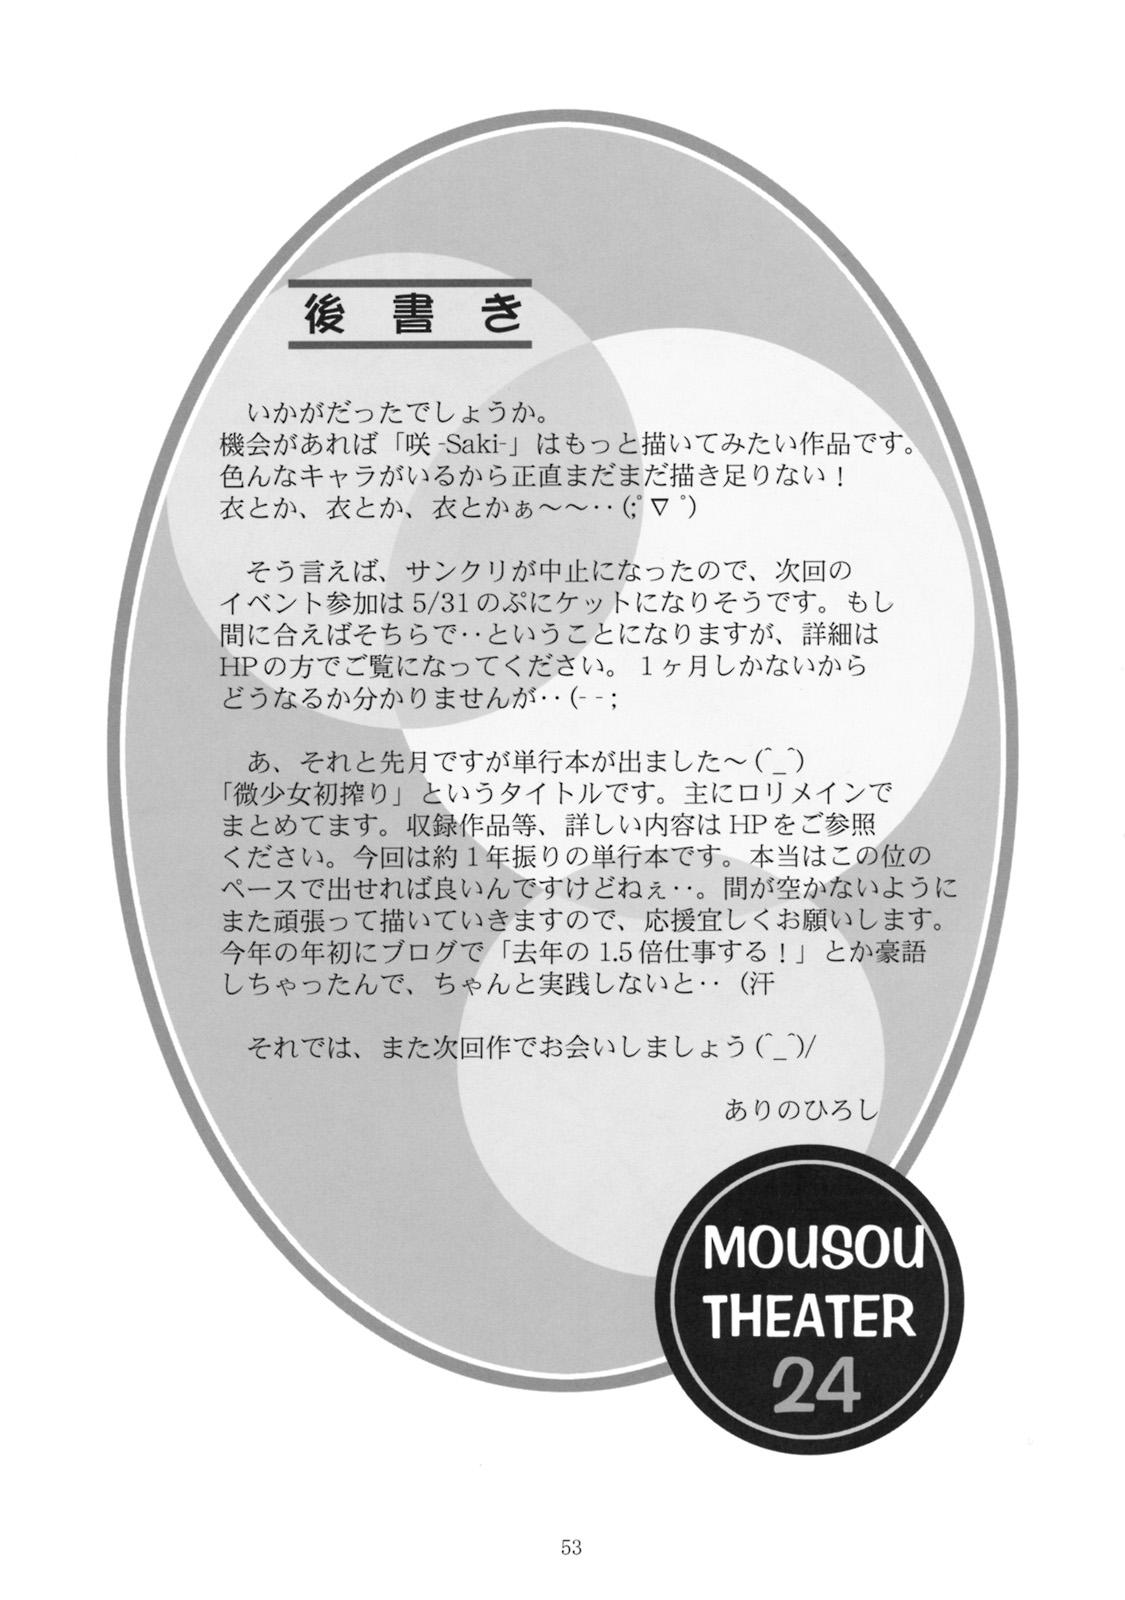 MOUSOU THEATER 24 51